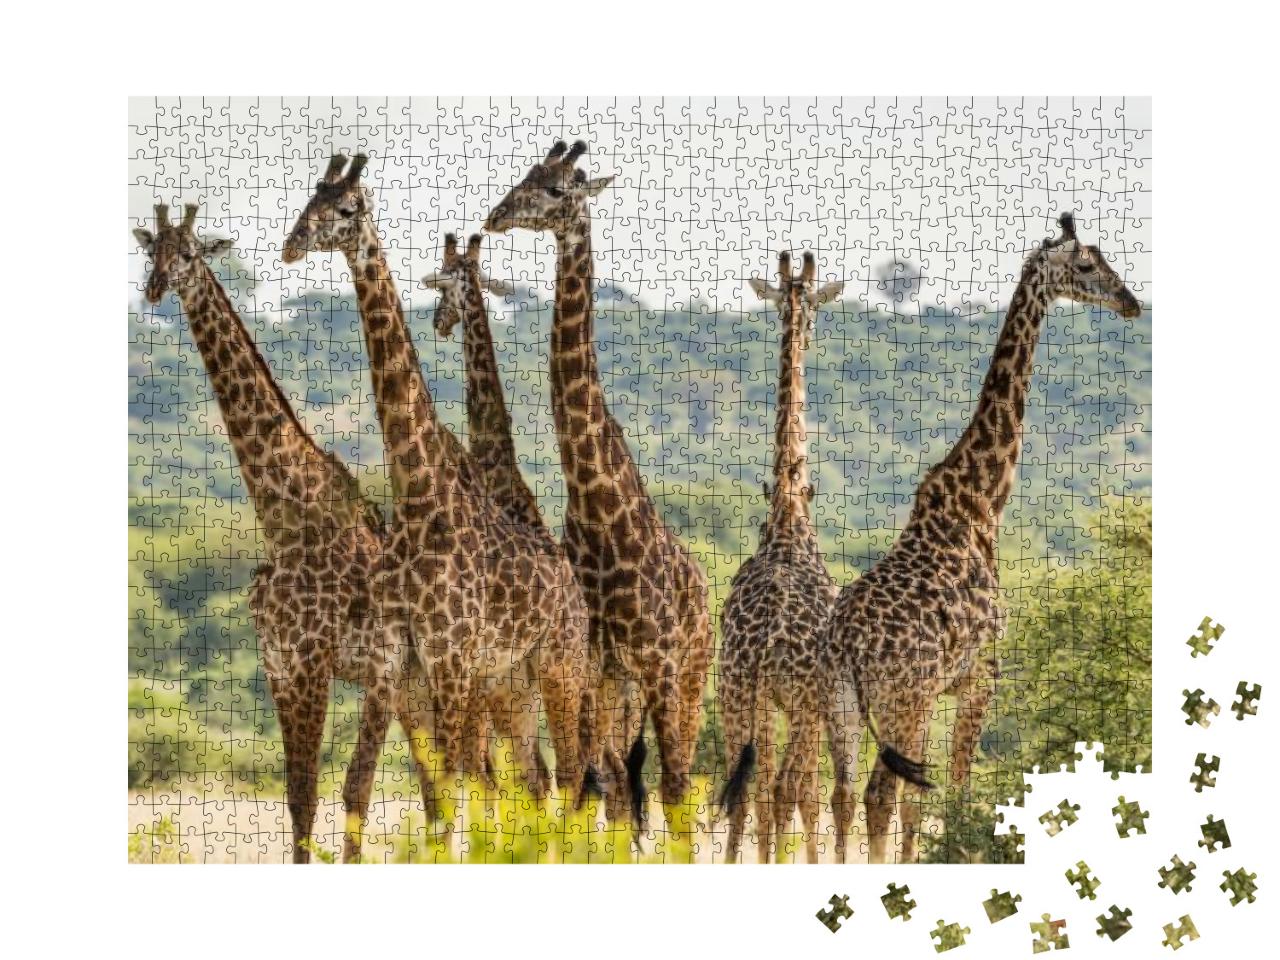 Group of Six Giraffes in Tarangire National Park, Tanzani... Jigsaw Puzzle with 1000 pieces